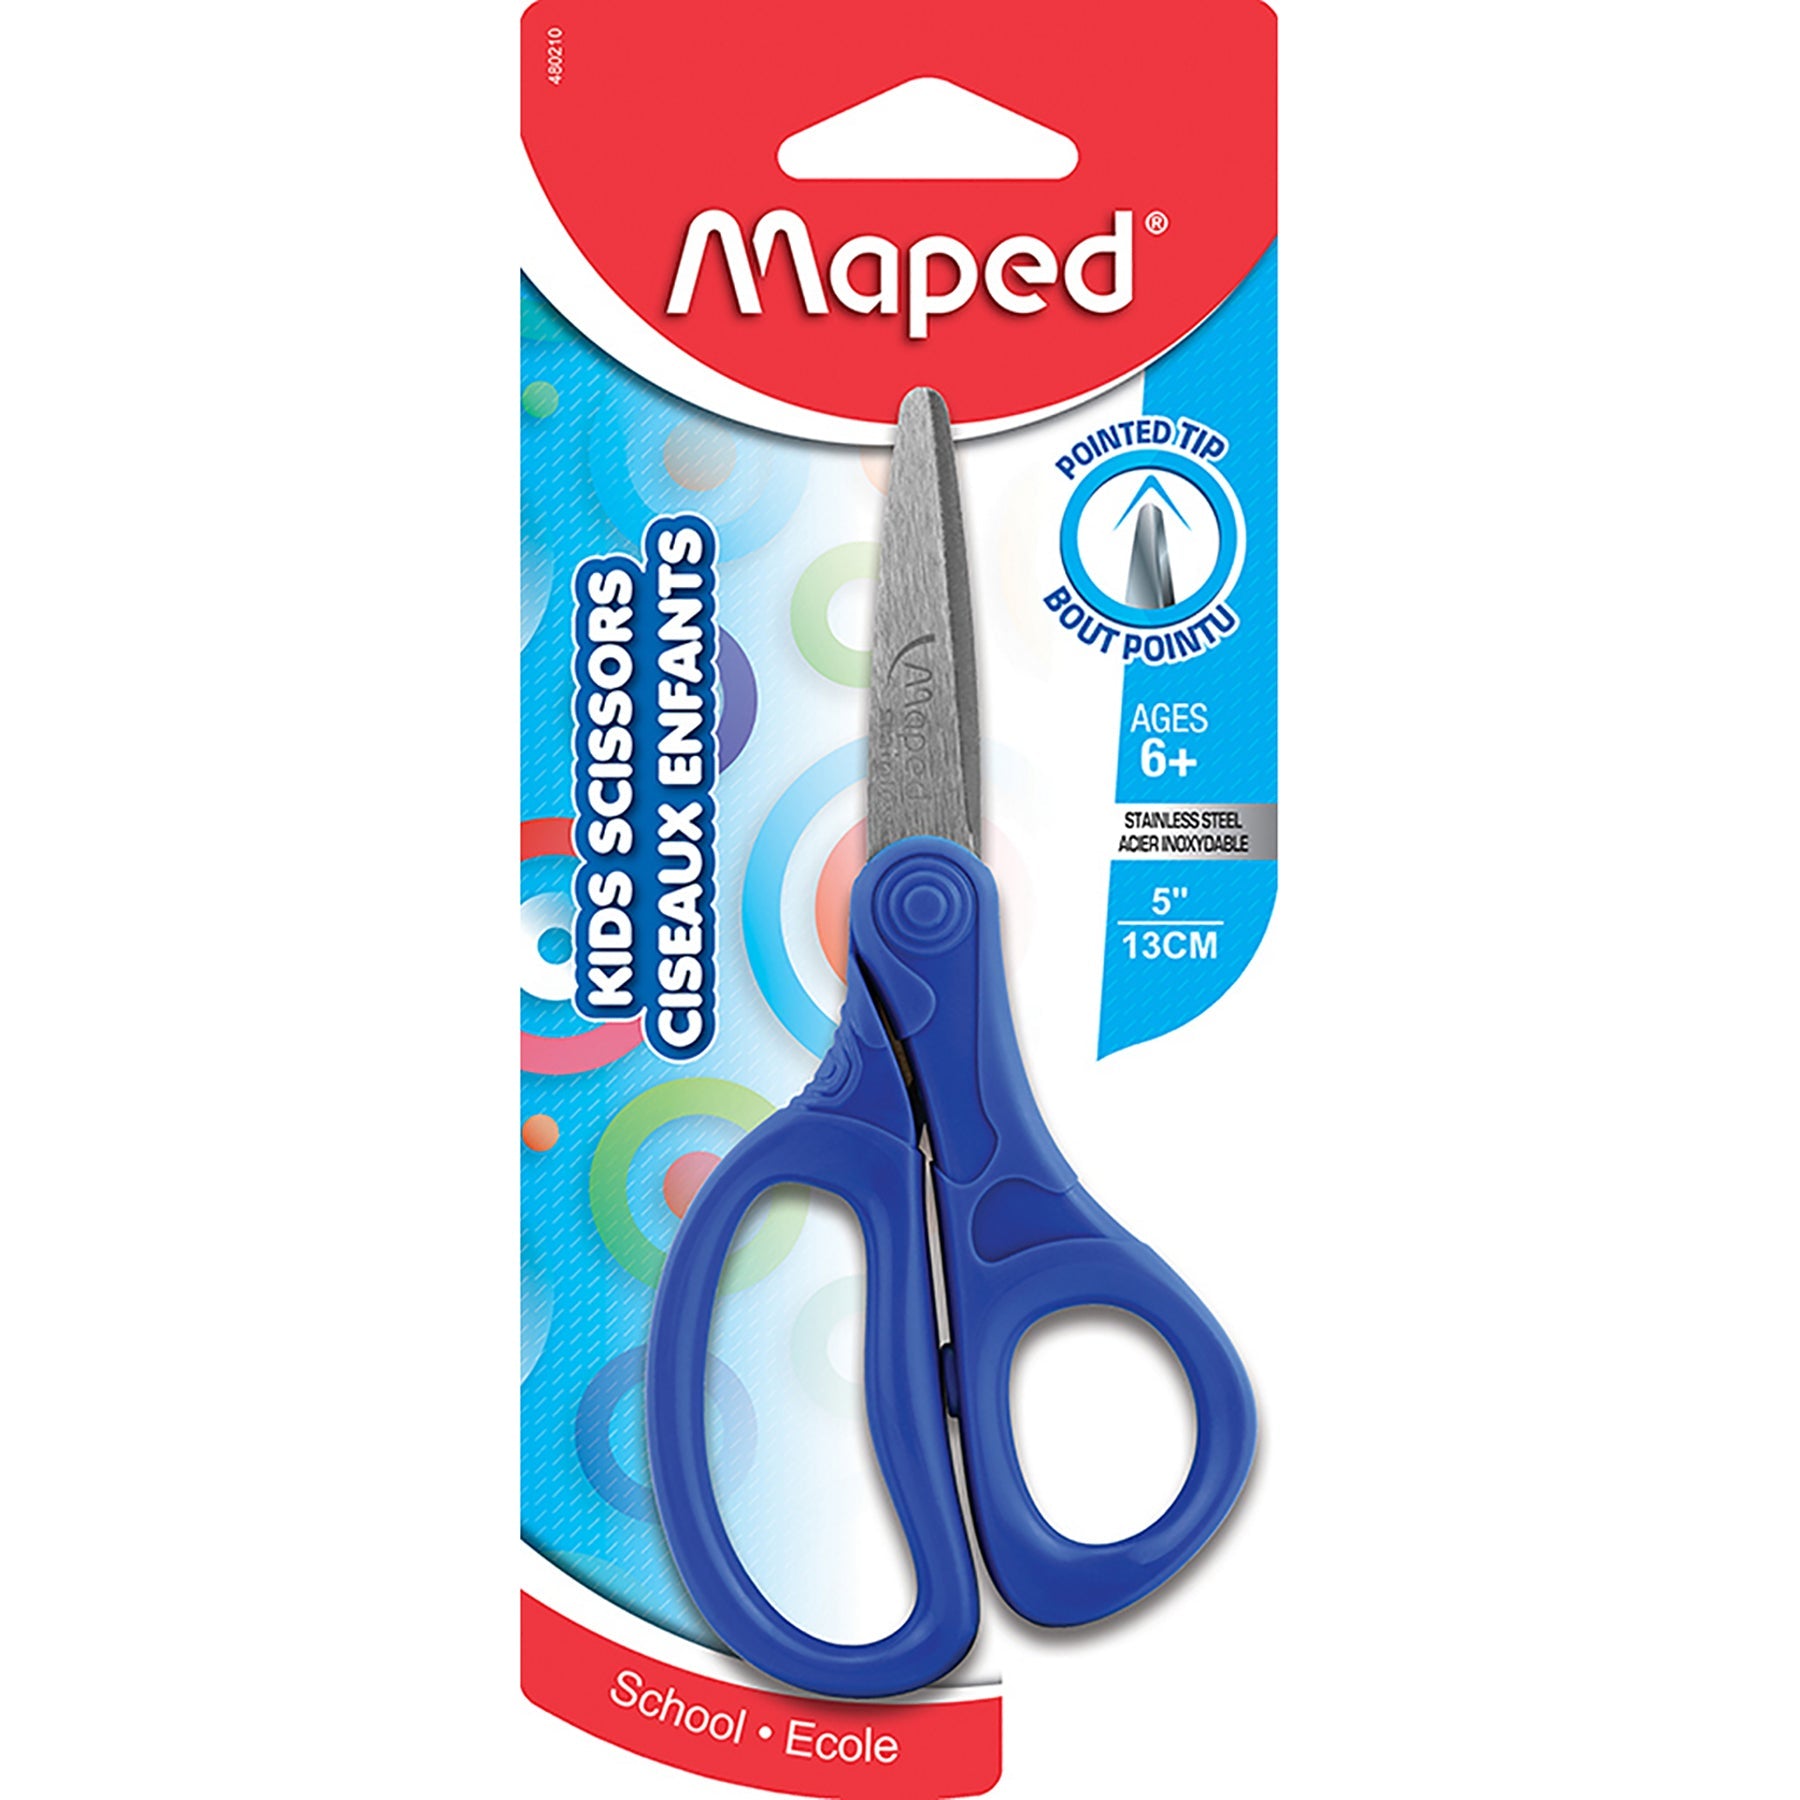 Maped Kids Scissors Pointed Tip 5in